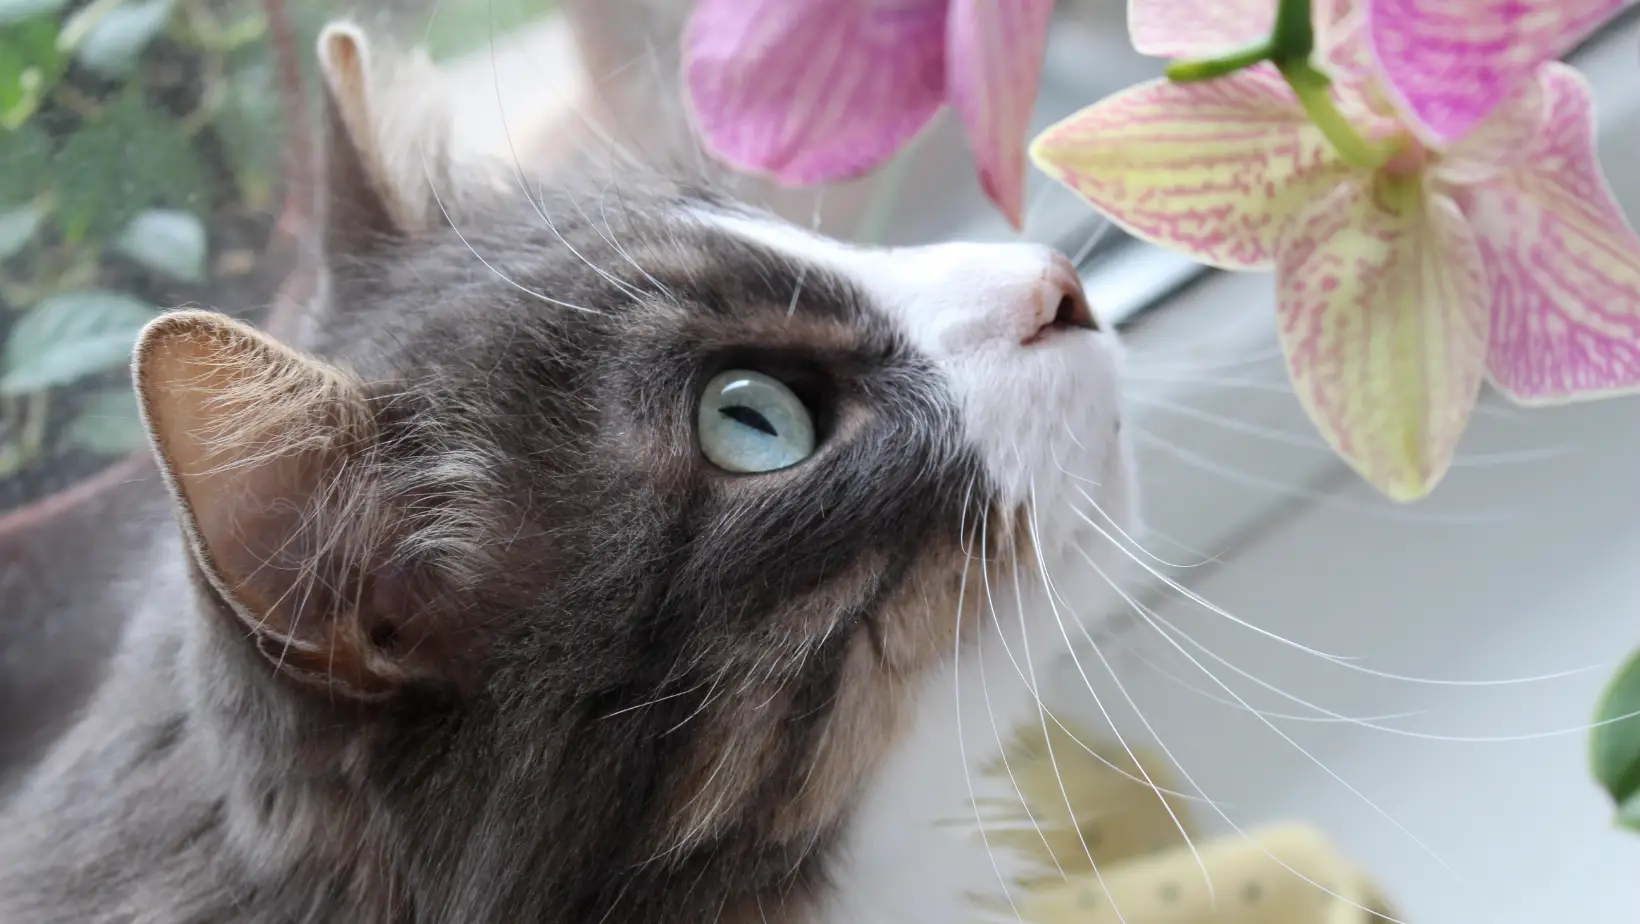 Flowers That Are Not Toxic to Cats?